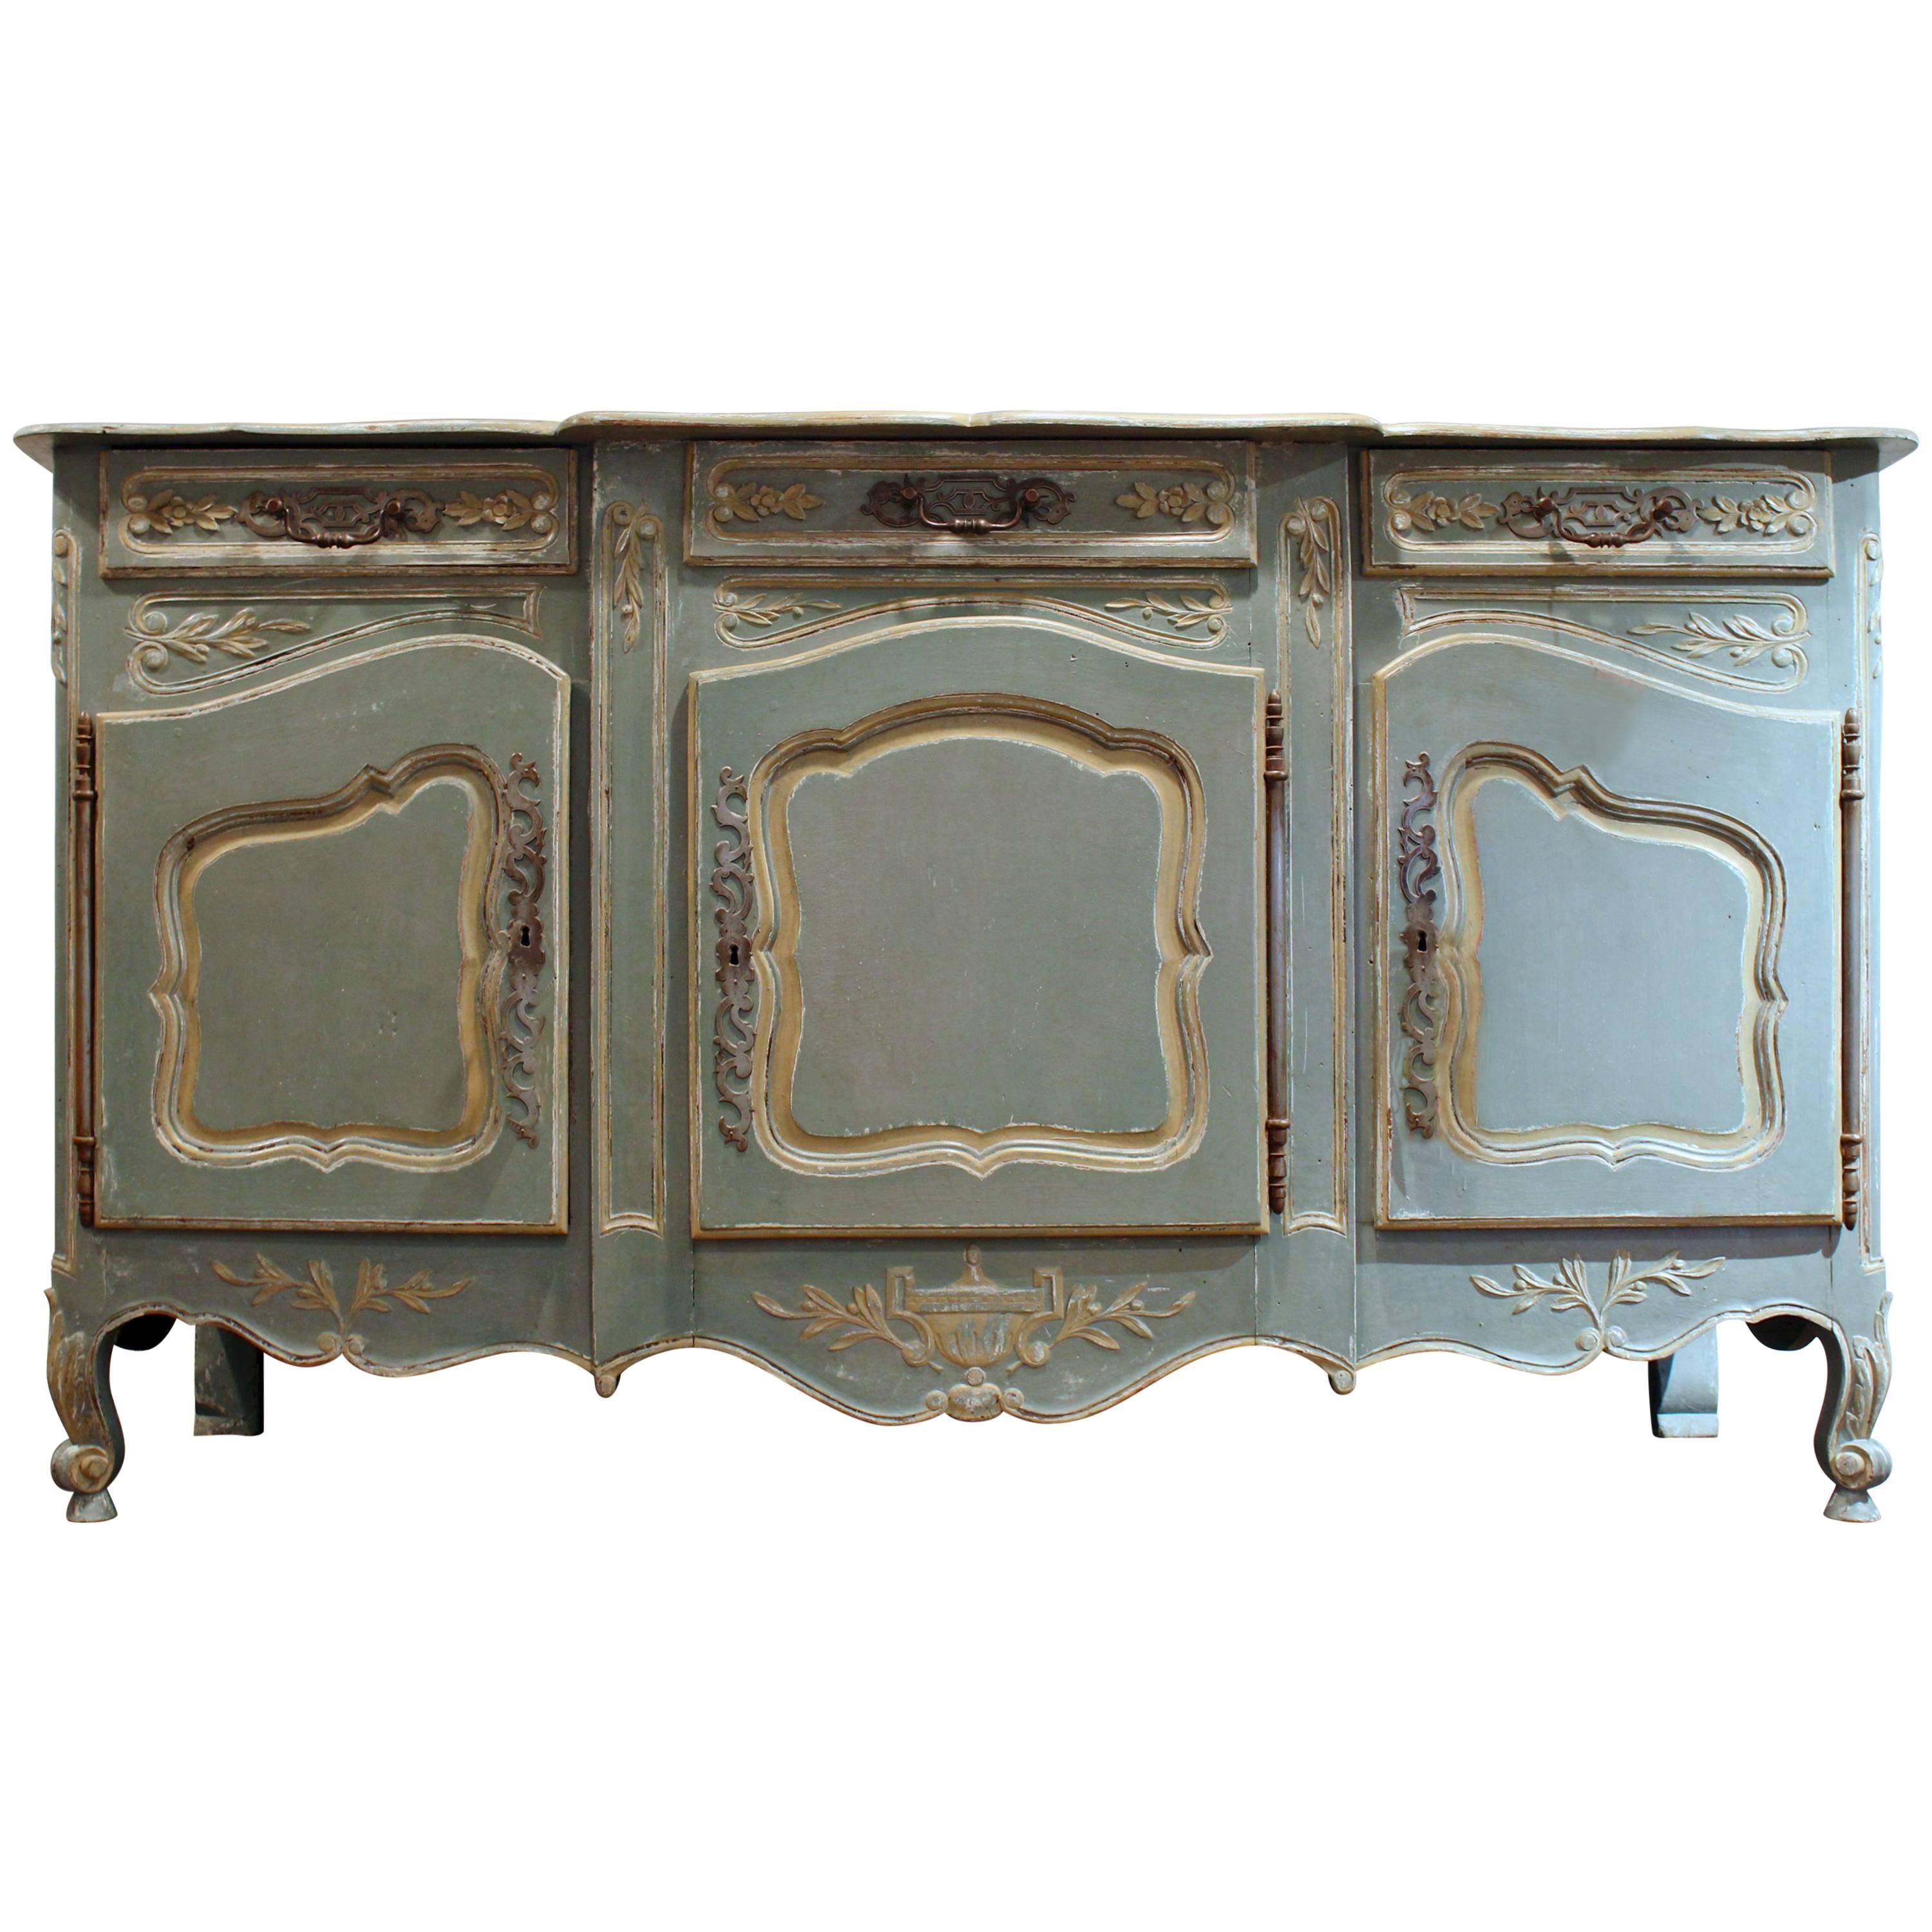 Extremely Rare Antique French Regence Enfilade